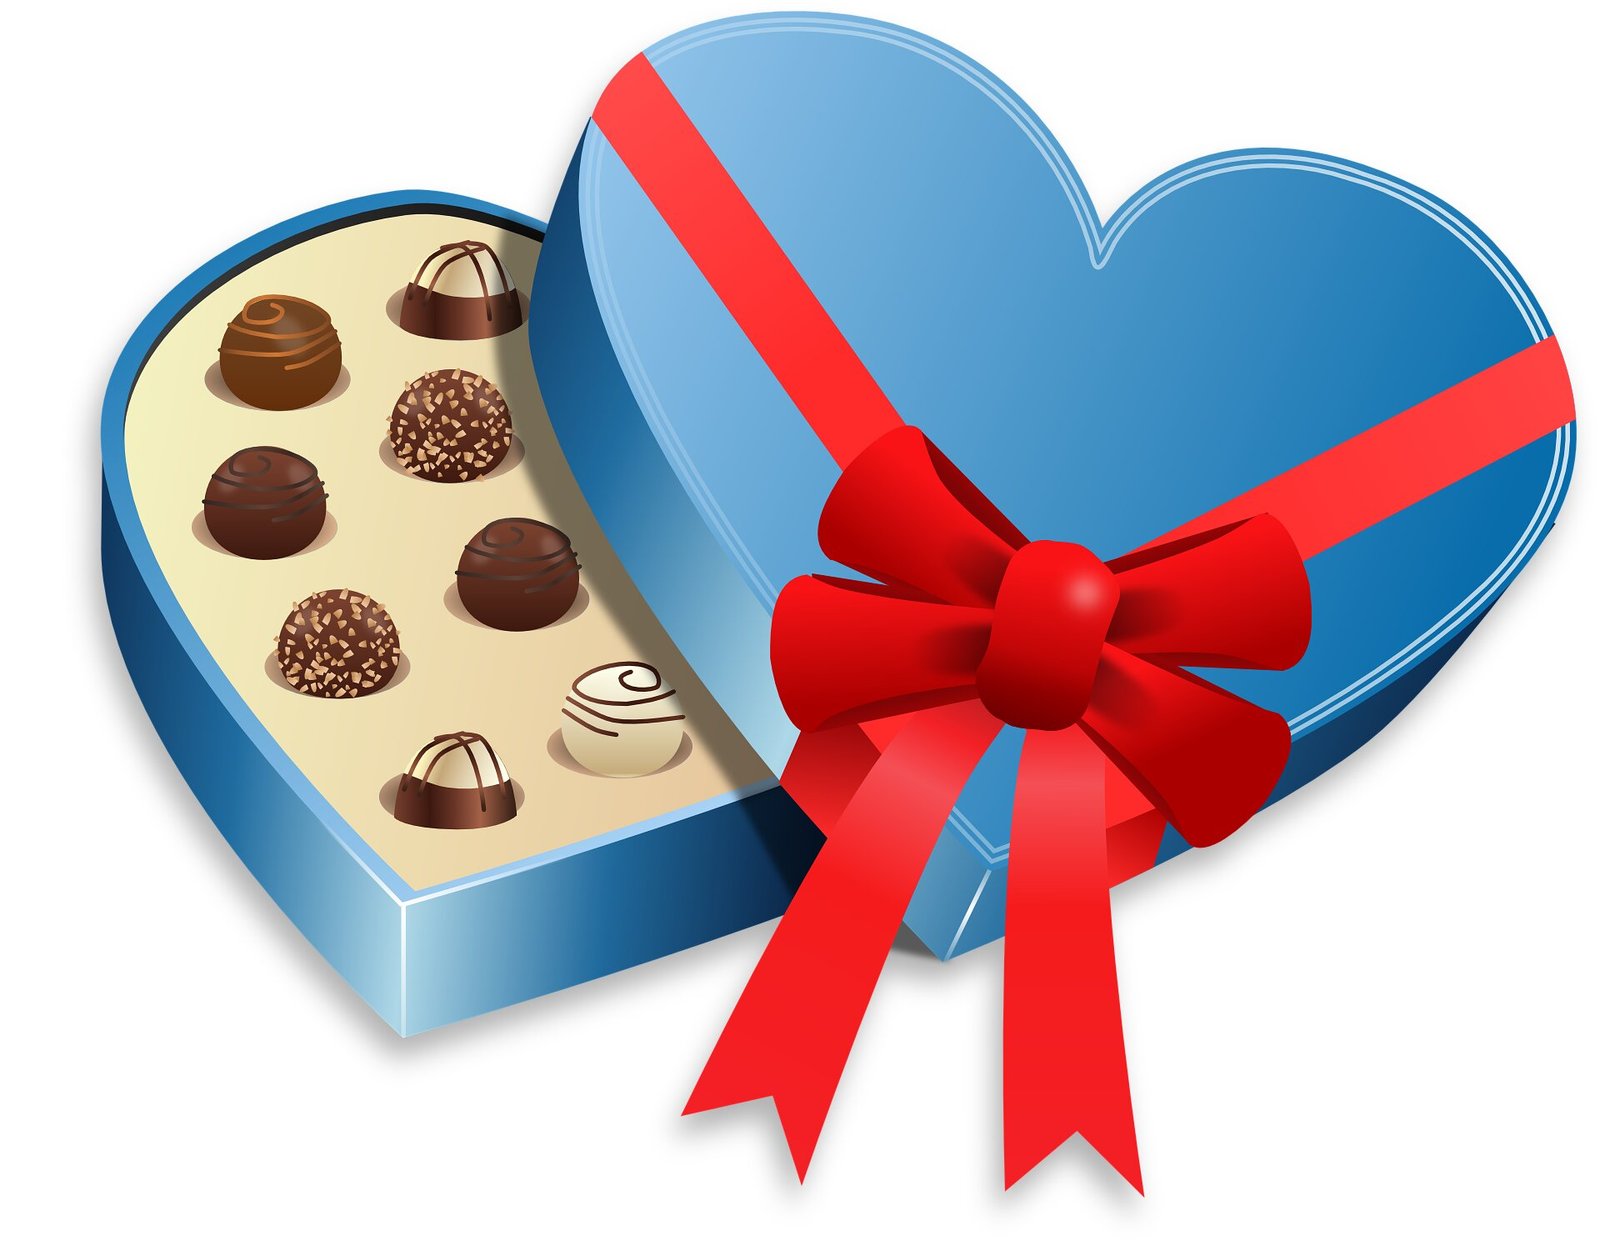 In moderation chocolate may be beneficial to health prevention of coronary artery disease